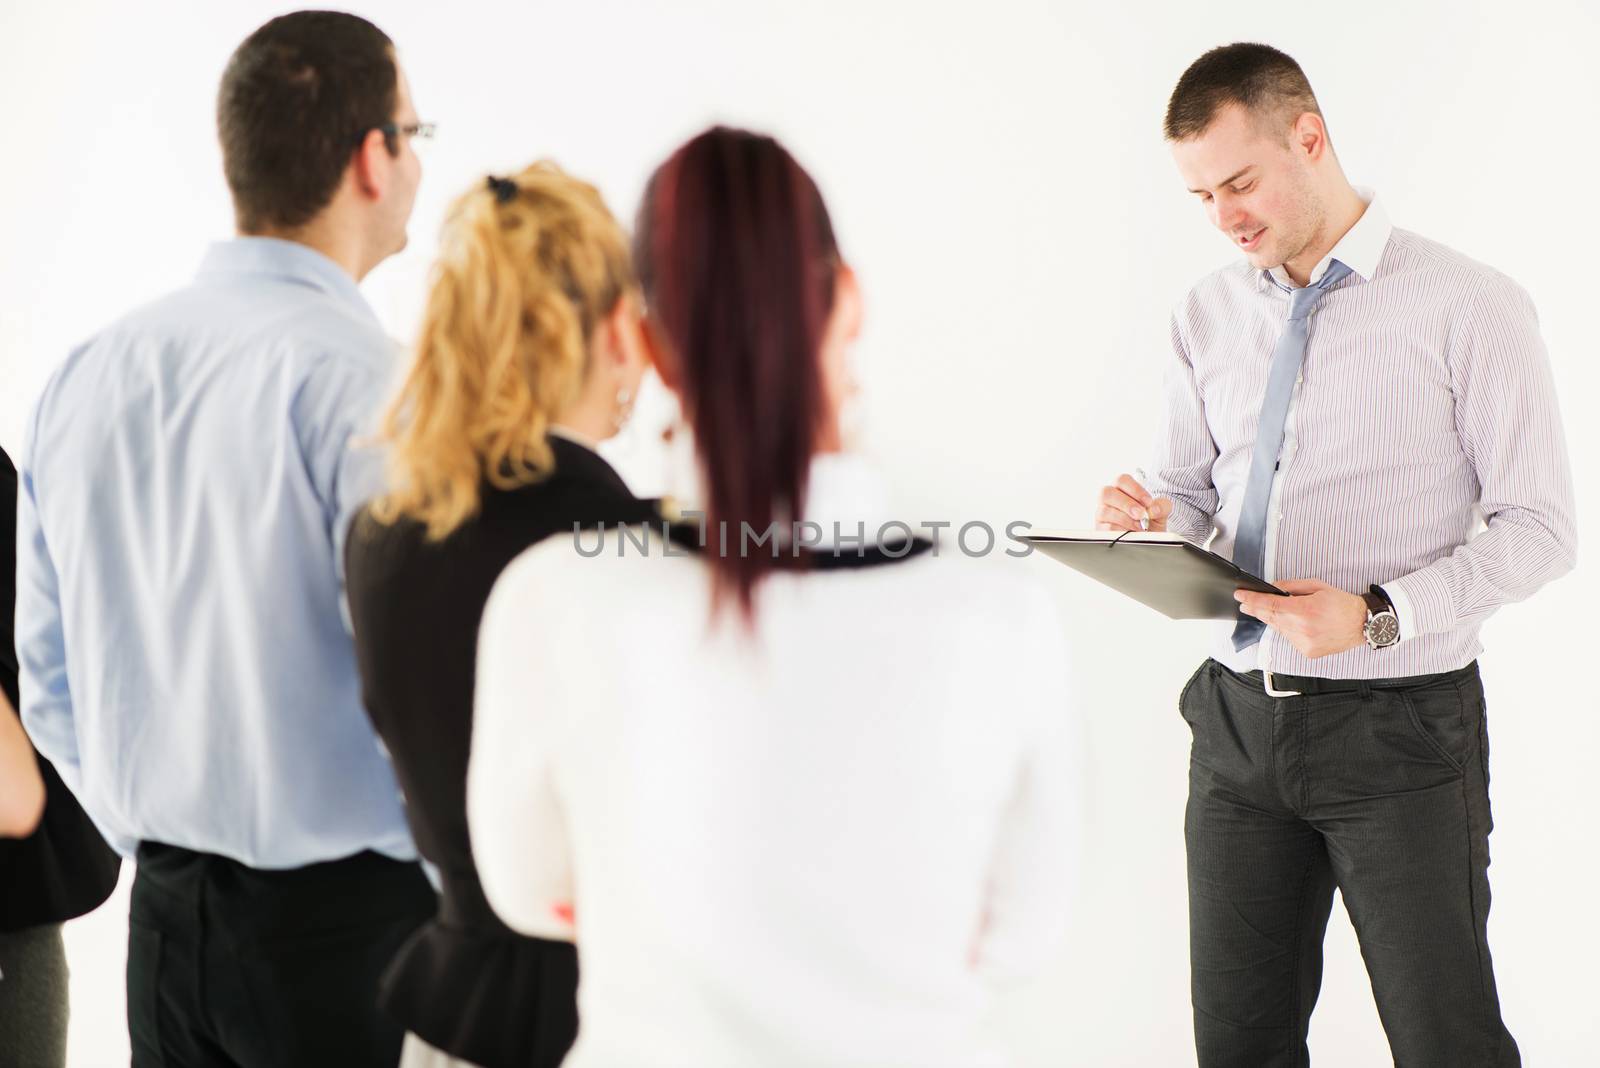 Friendly business man explaining plan of work in front of coworkers. The team is listening.